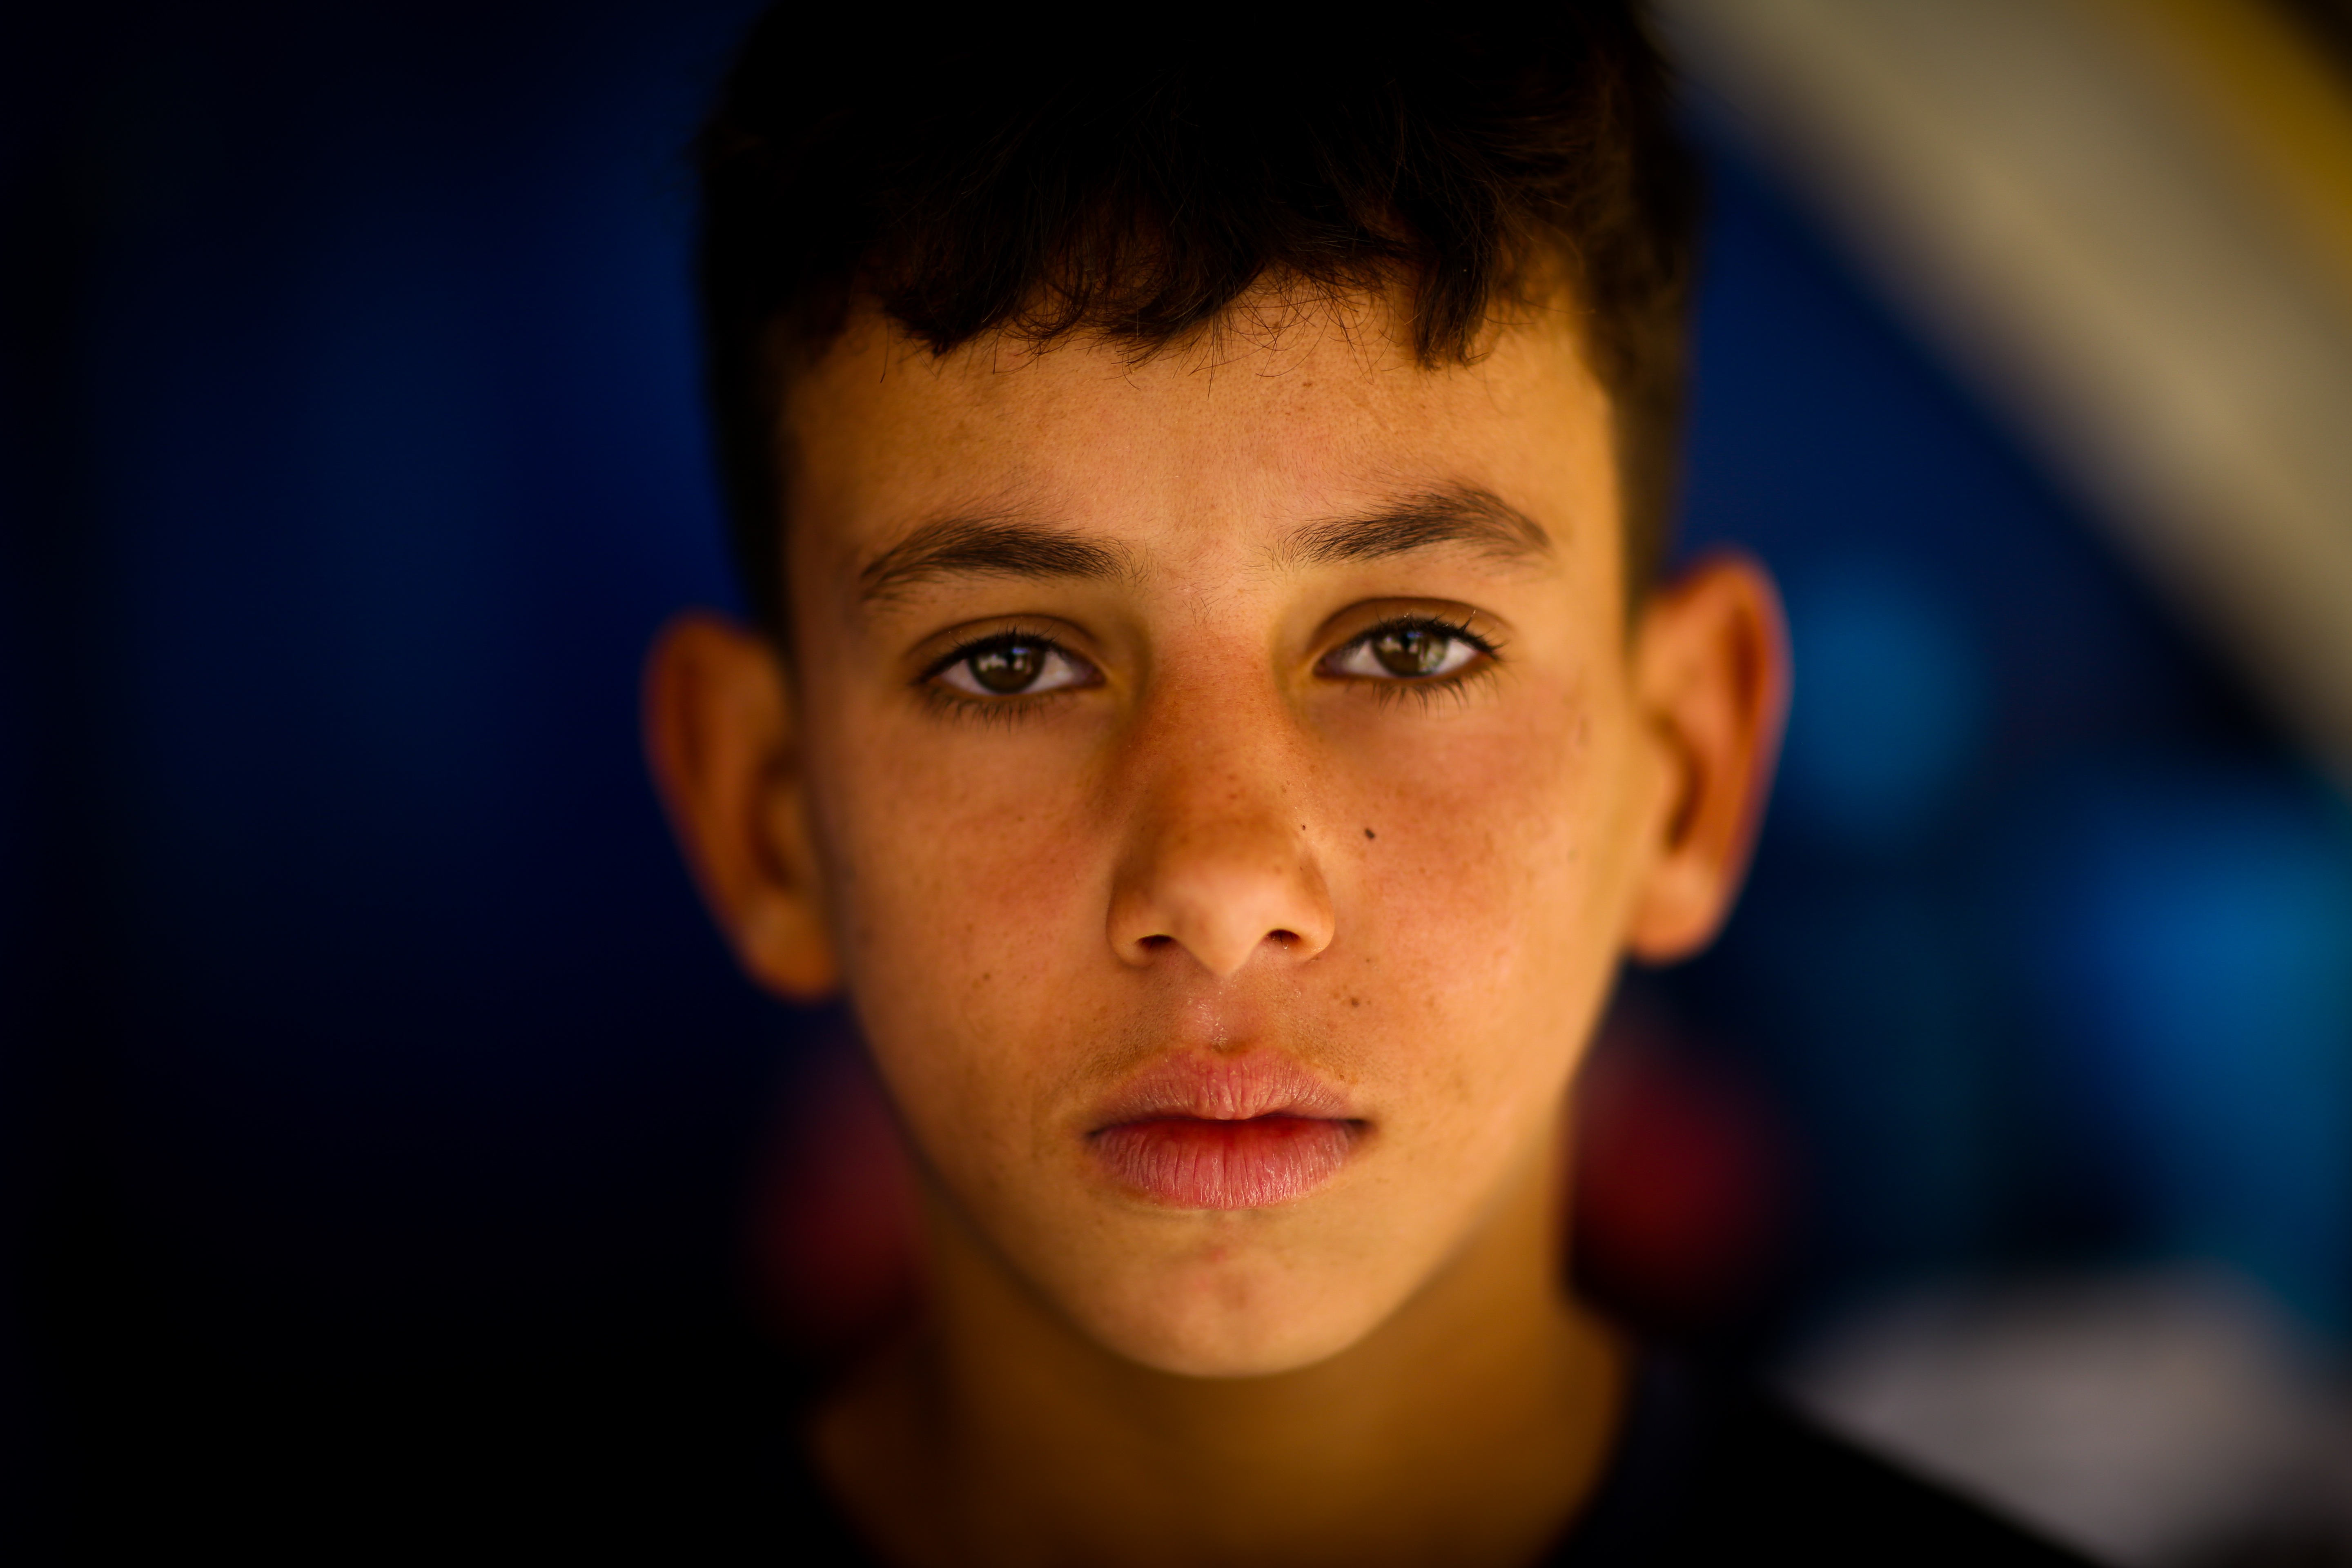 Boy age 12 looks older than his years, living in tented settlement in Iraq having fled bombs and persecution